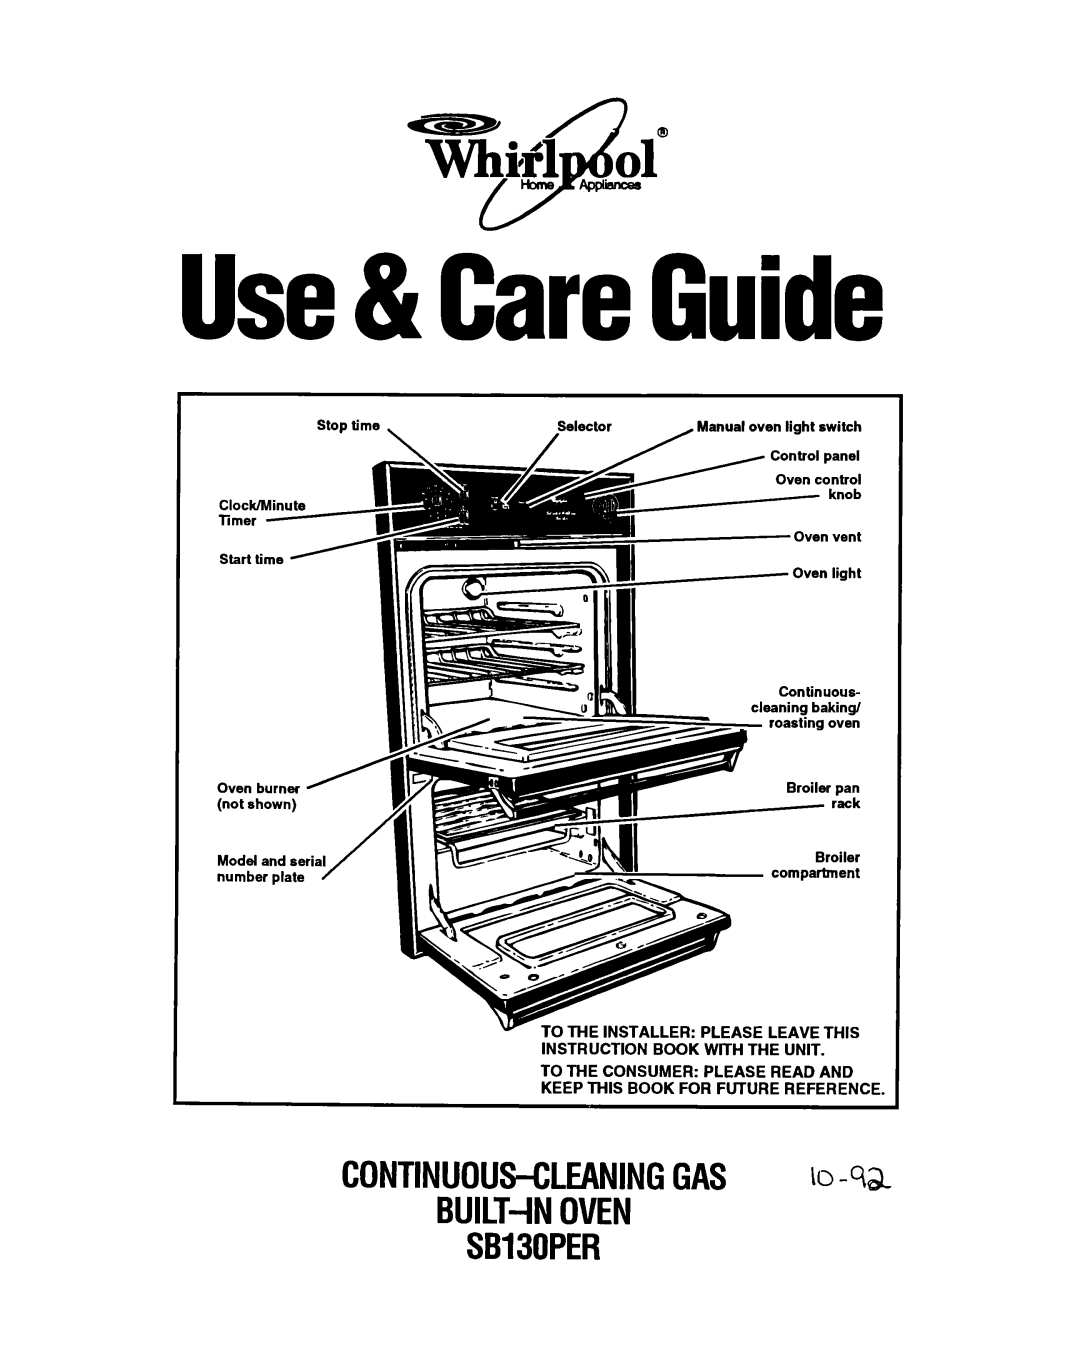 Whirlpool SBl3OPER manual CONTINUOUS-CLEANINGGAS BUILT-INOVEN SBlSOPER, Use& CareGuide 